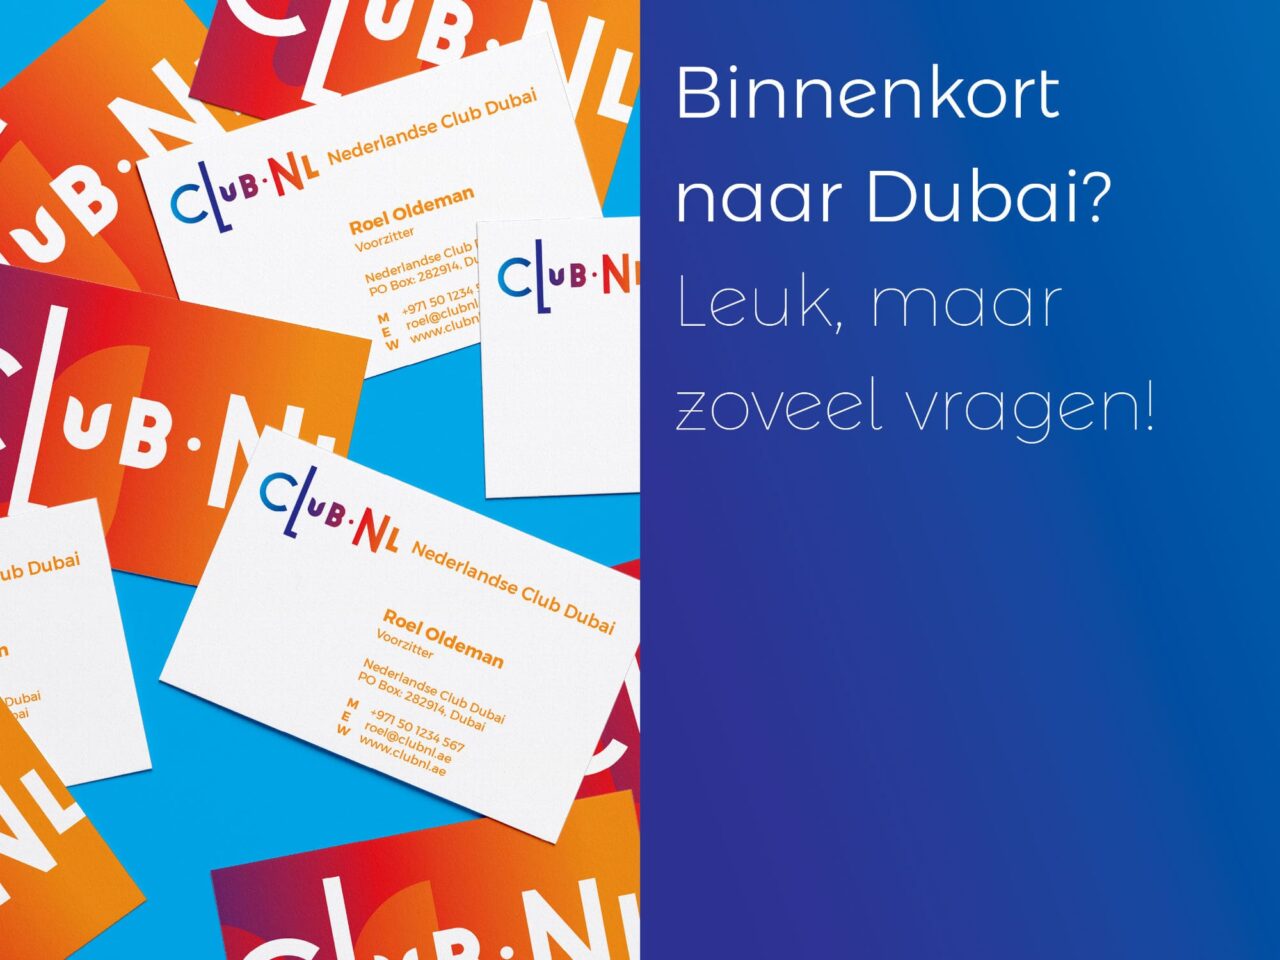 club nl casestudy business cards